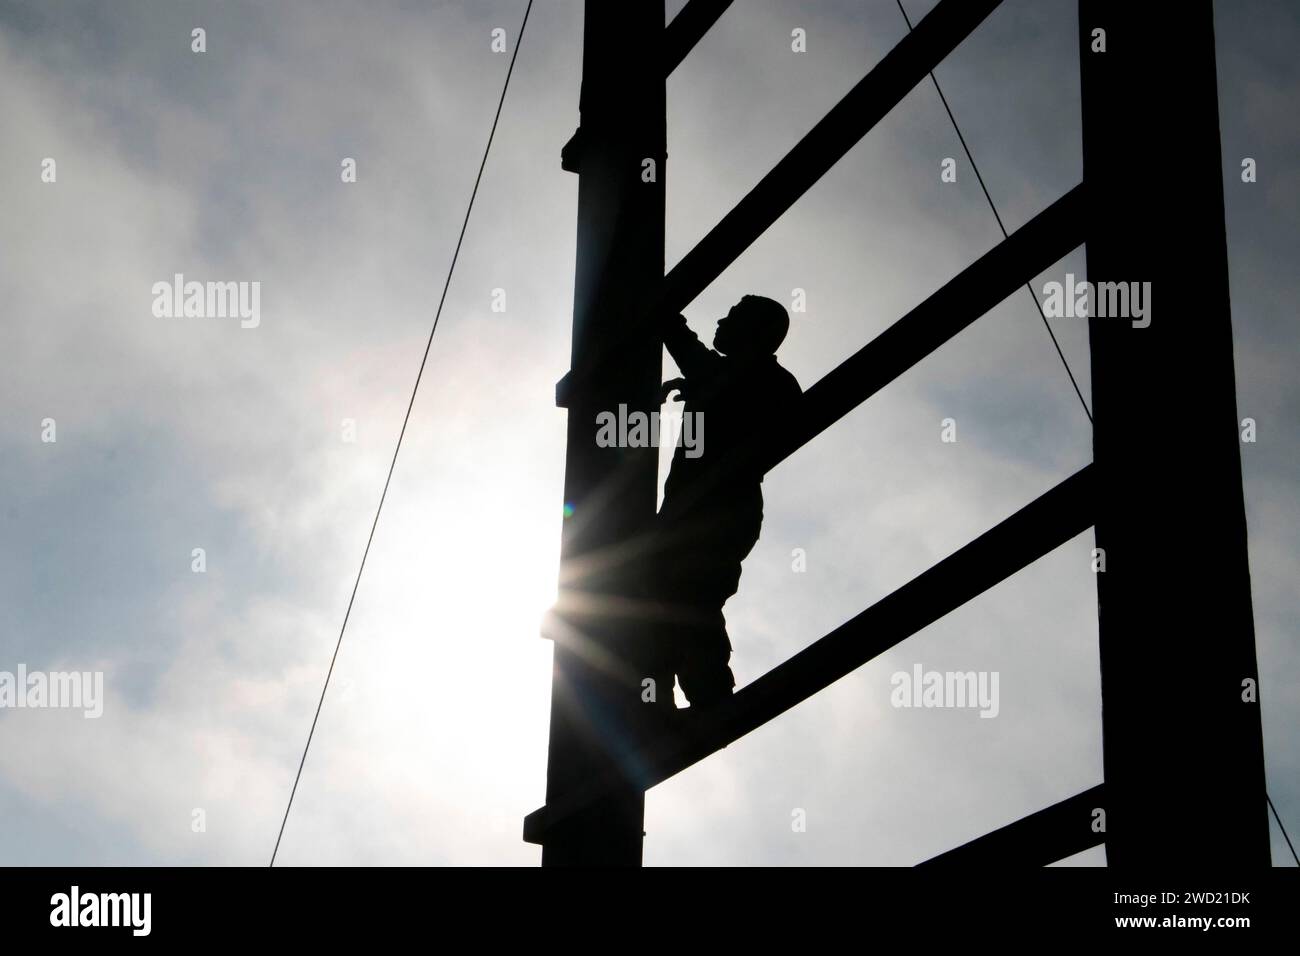 U.S. Army Soldier competes in the obstacle course event at Fort Bragg, North Carolina. Stock Photo